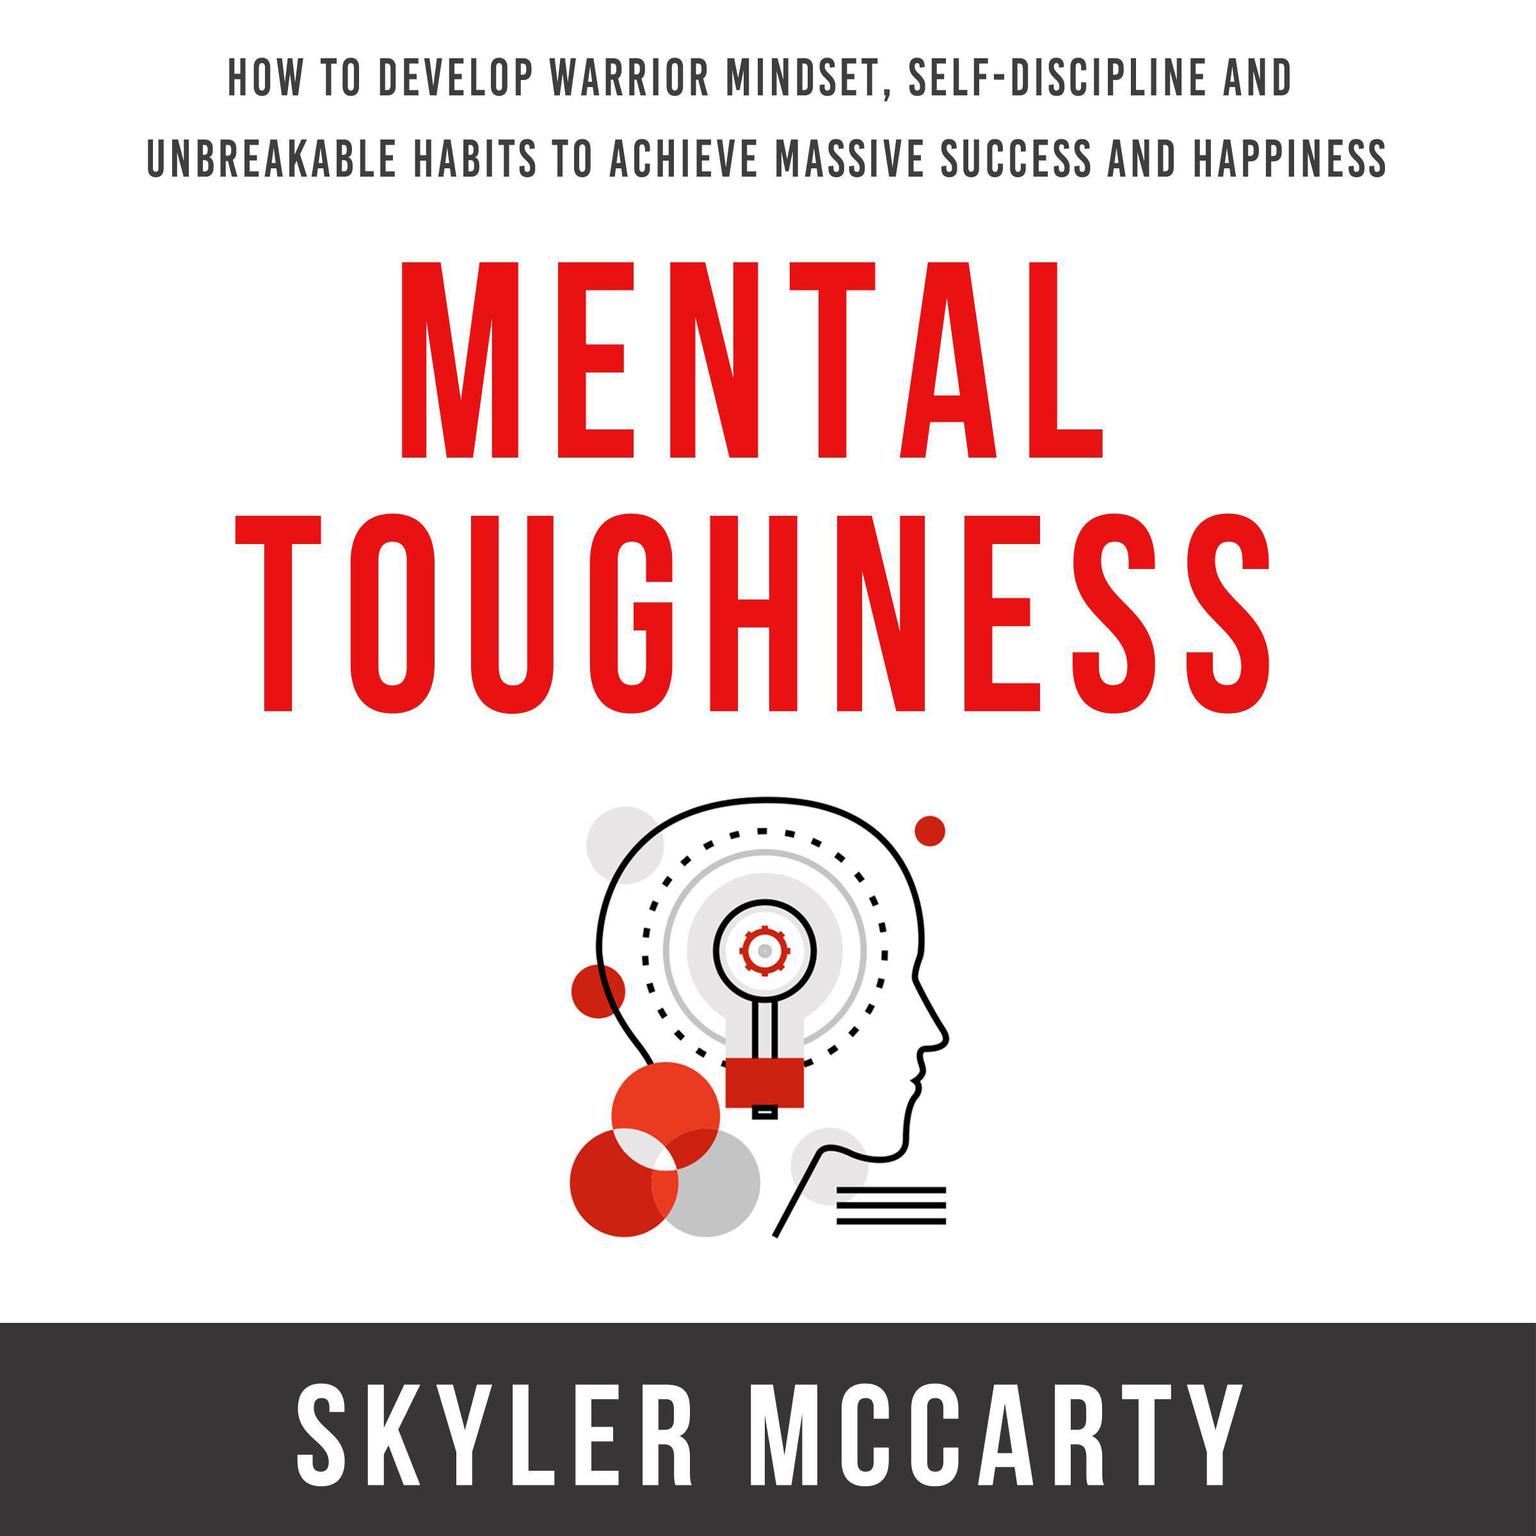 Mental Toughness: How to Develop Warrior Mindset, Self-Discipline, and Unbreakable Habits to Achieve Massive Success and Happiness Audiobook, by Skyler McCarty